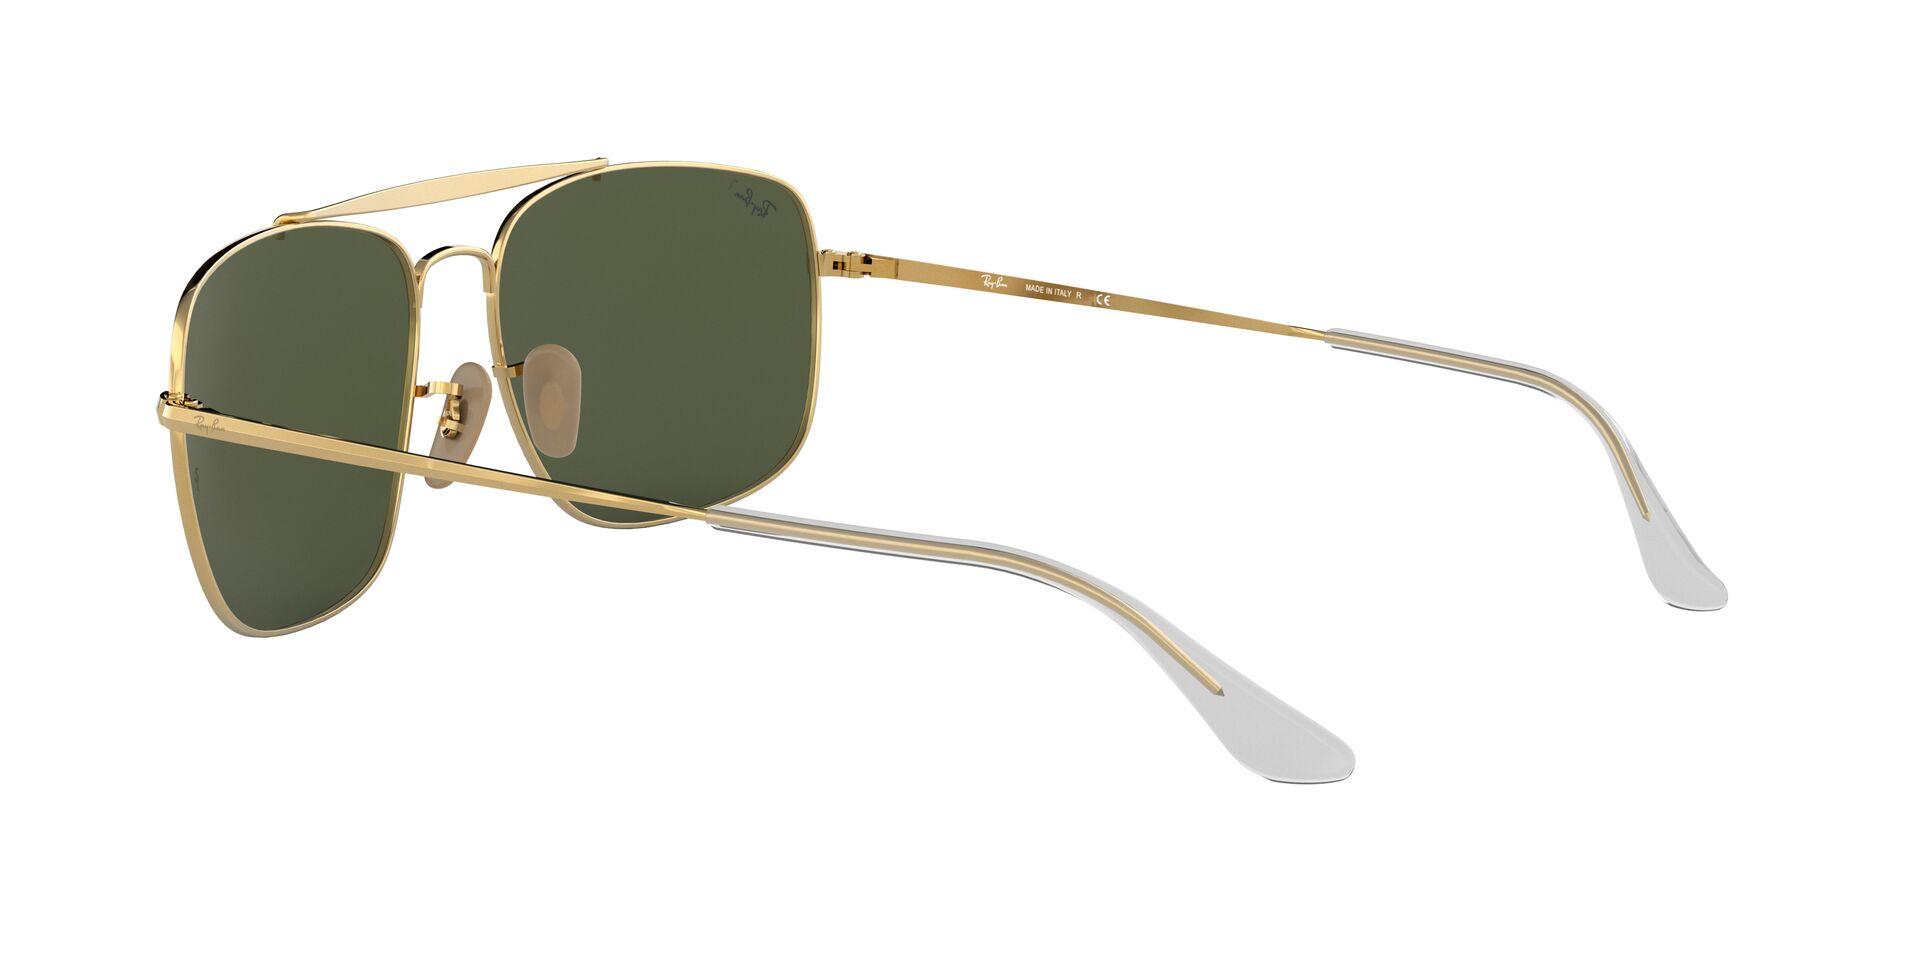 Mắt Kính Ray-Ban The Colonel - RB3560 001 -Sunglasses